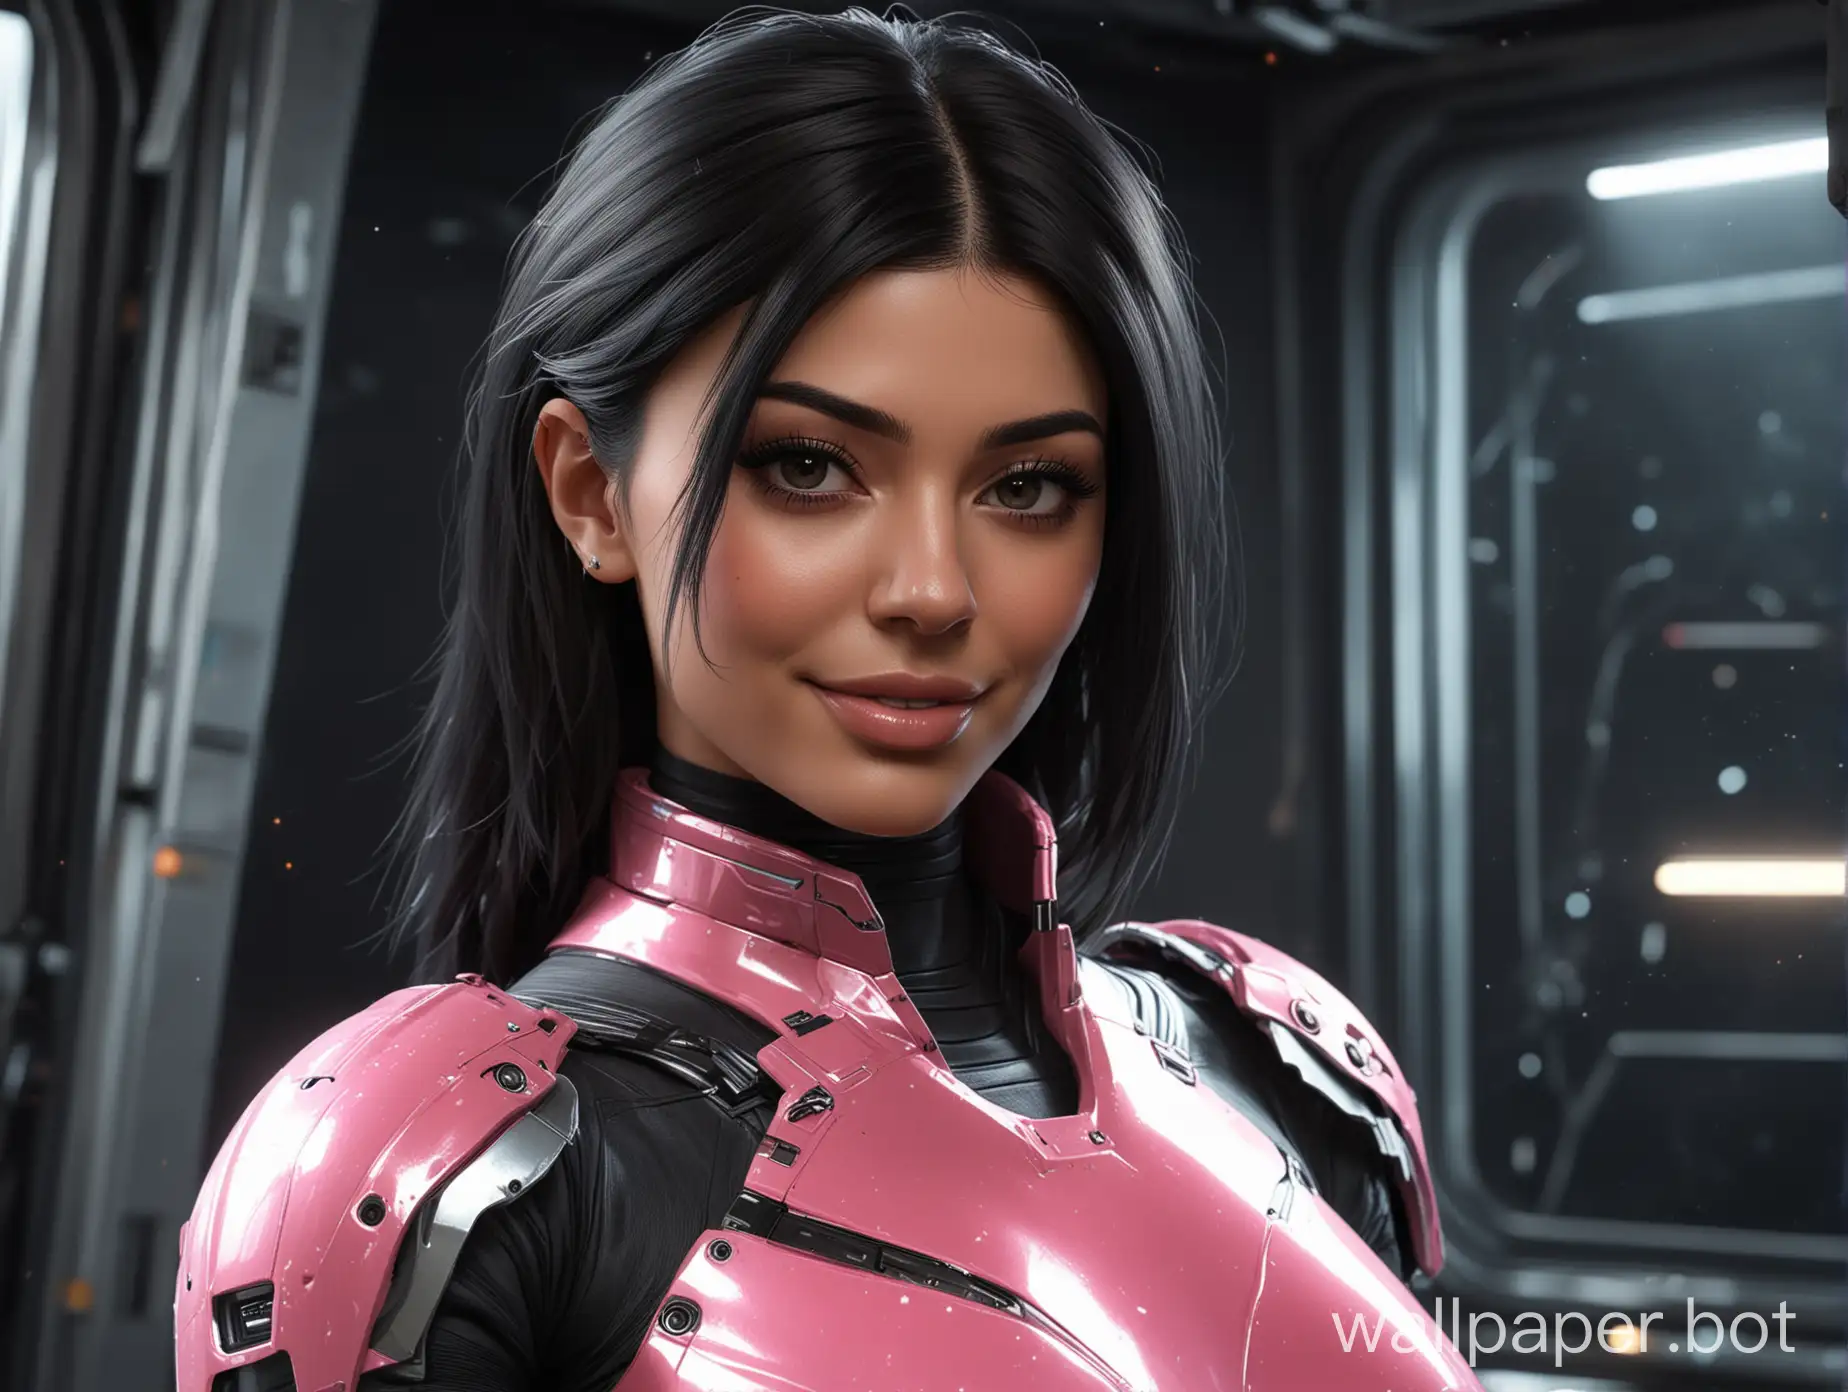 Star Citizen,female with kylie jenner face, selfie, Science-Fiction, close-up headshot, shiny cyber armor undersuit with the 3 colors Pink Black Silver, curvy female bodyshape, stars and planet through a window in the background, black long hair, natural black eyes, futuristic headgear, sexy smiling with showing teeth, over-the-shoulder shot